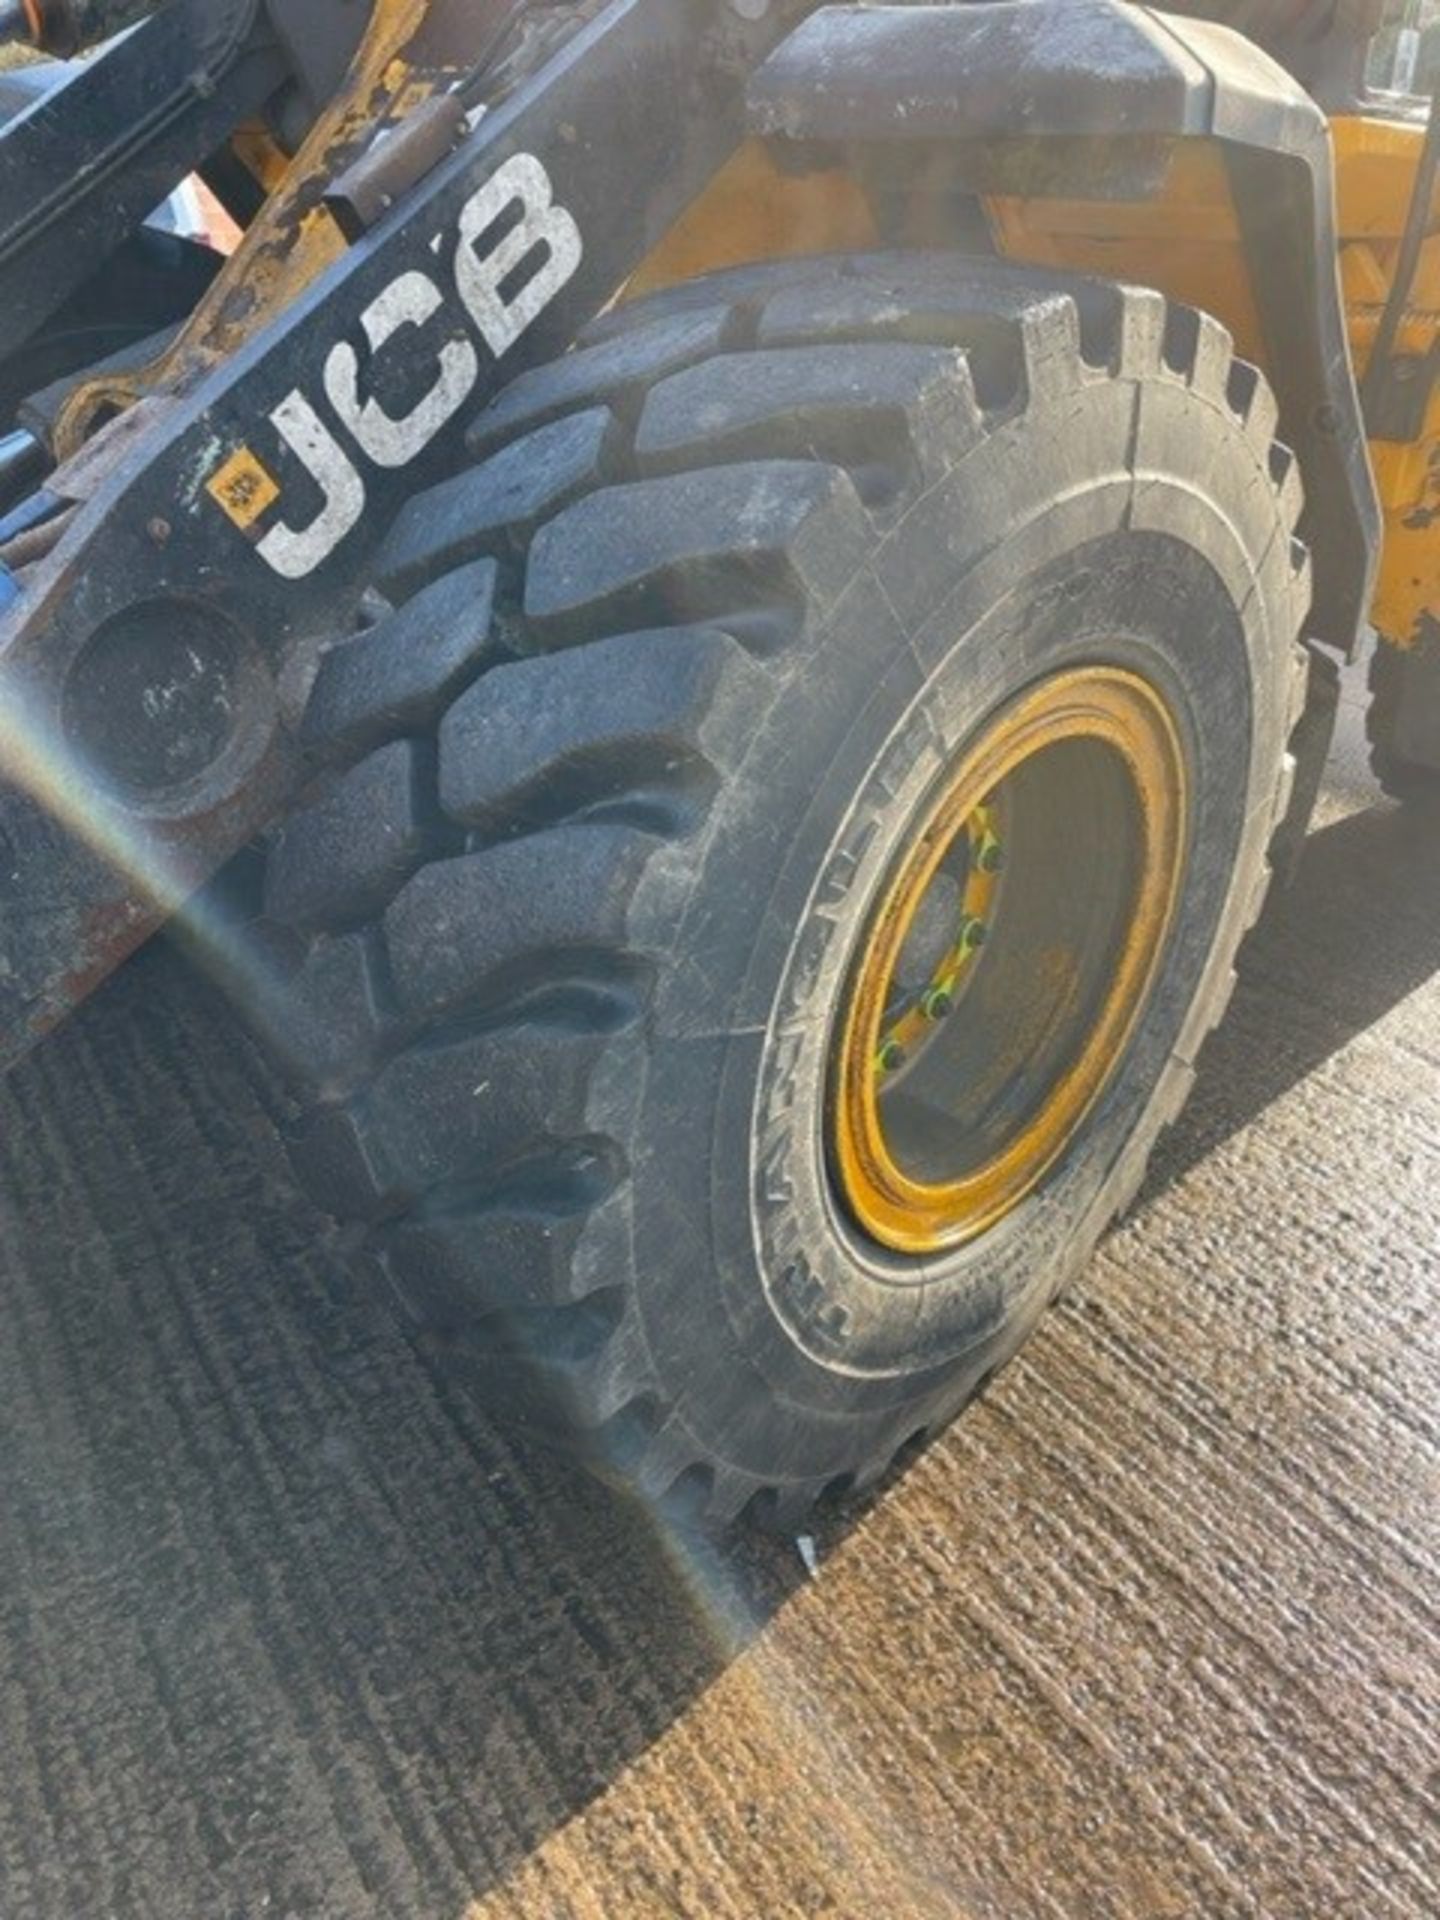 JCB, Wastemaster 427 S5, wheel loader, PIN: JCB4A5A9VK2679908 (2019), Last known Hours 3775.8, - Image 6 of 24